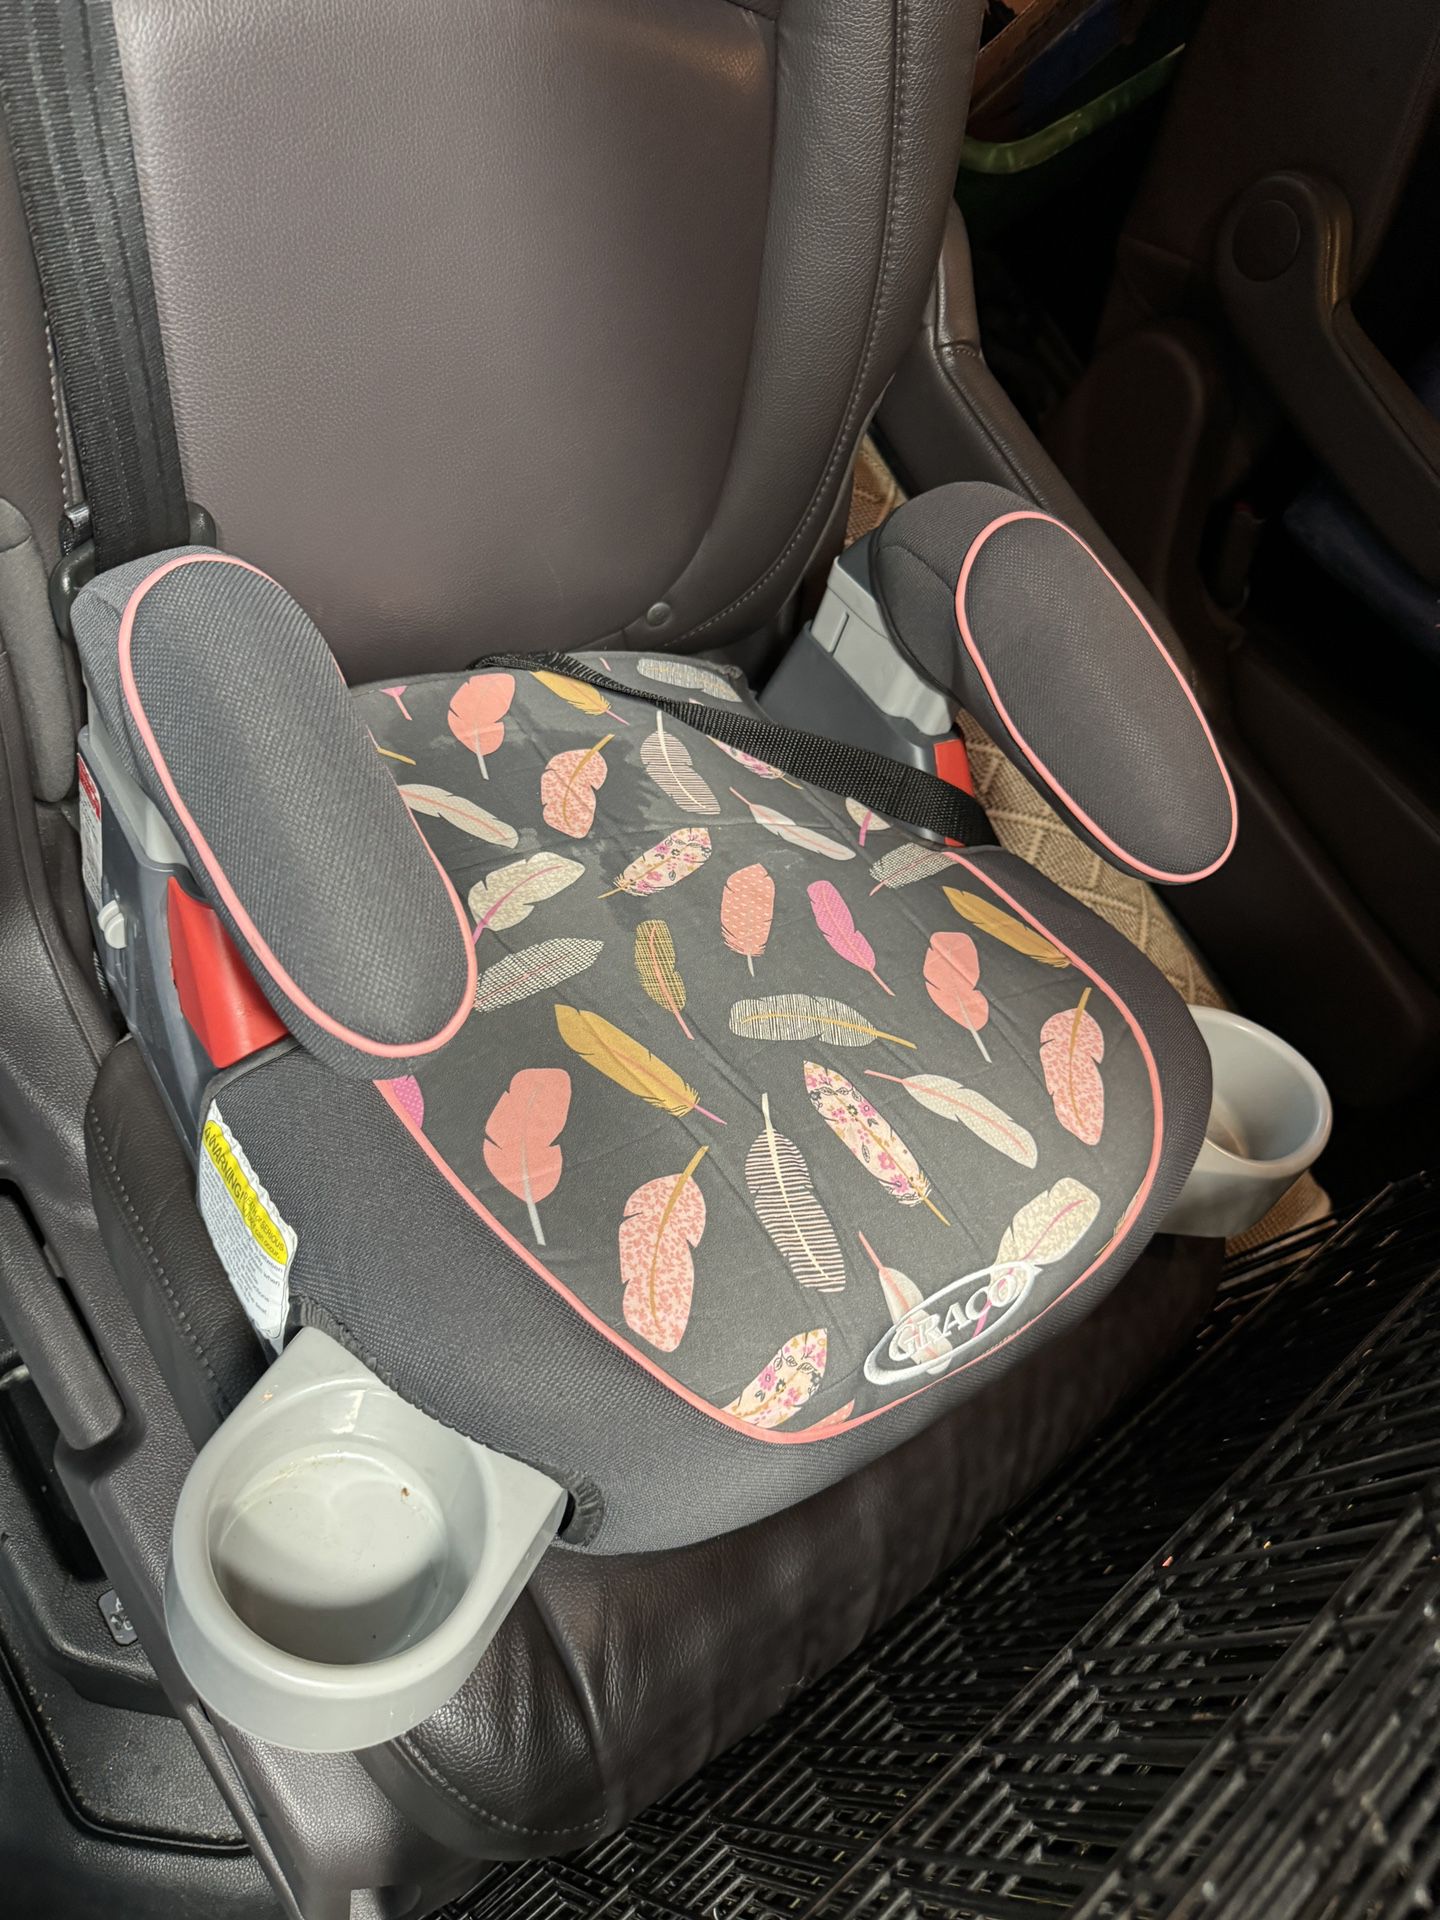 Graco Booster Seat With Cup holders In Great Shape! 